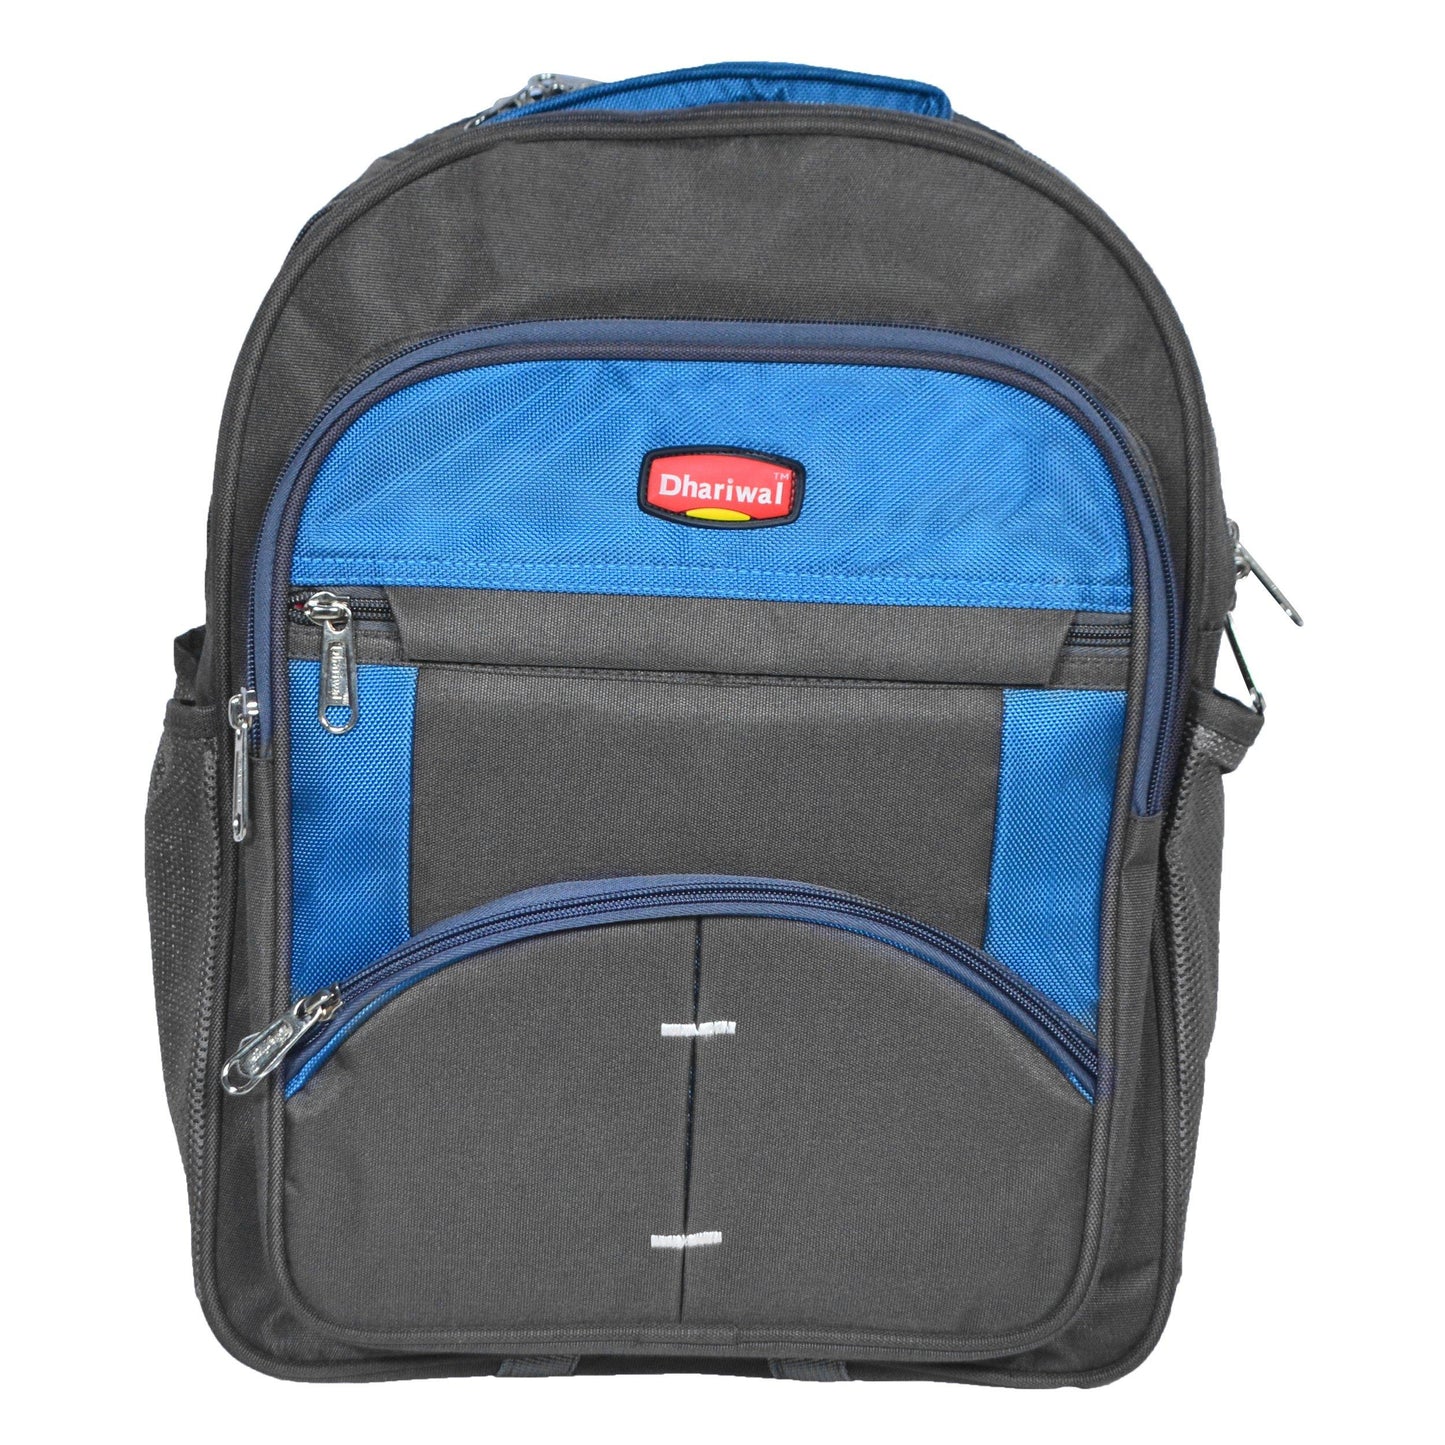 Dhariwal 34L Water Resistant Dual Compartment Matty School Bag School Bag SCB-310 Class 4 to 12 School Bags Dhariwal Grey 